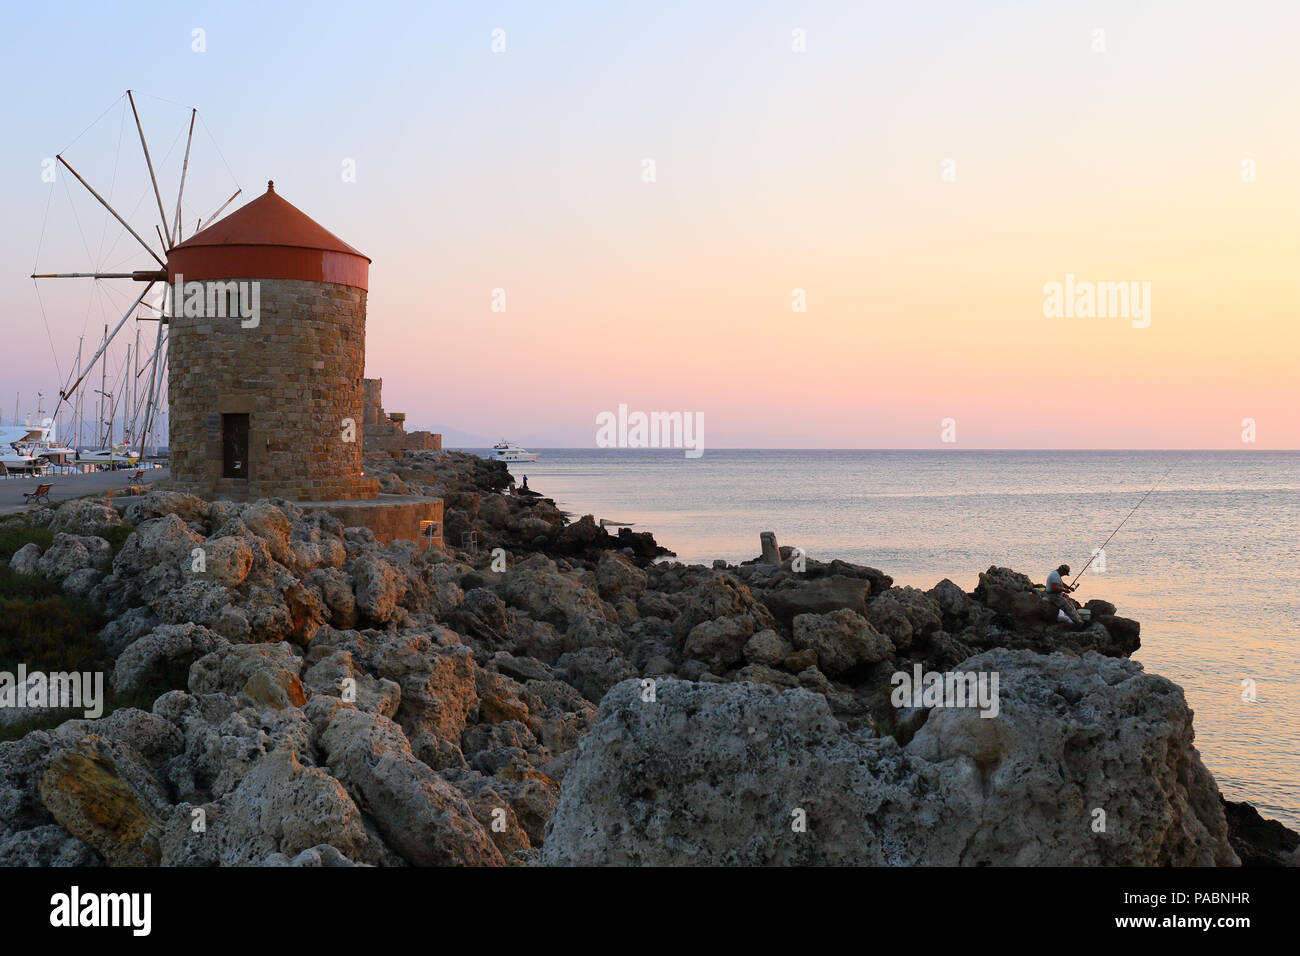 The medieval windmills in Mandraki harbour in Rhodes, Greece at sunrise. Stock Photo